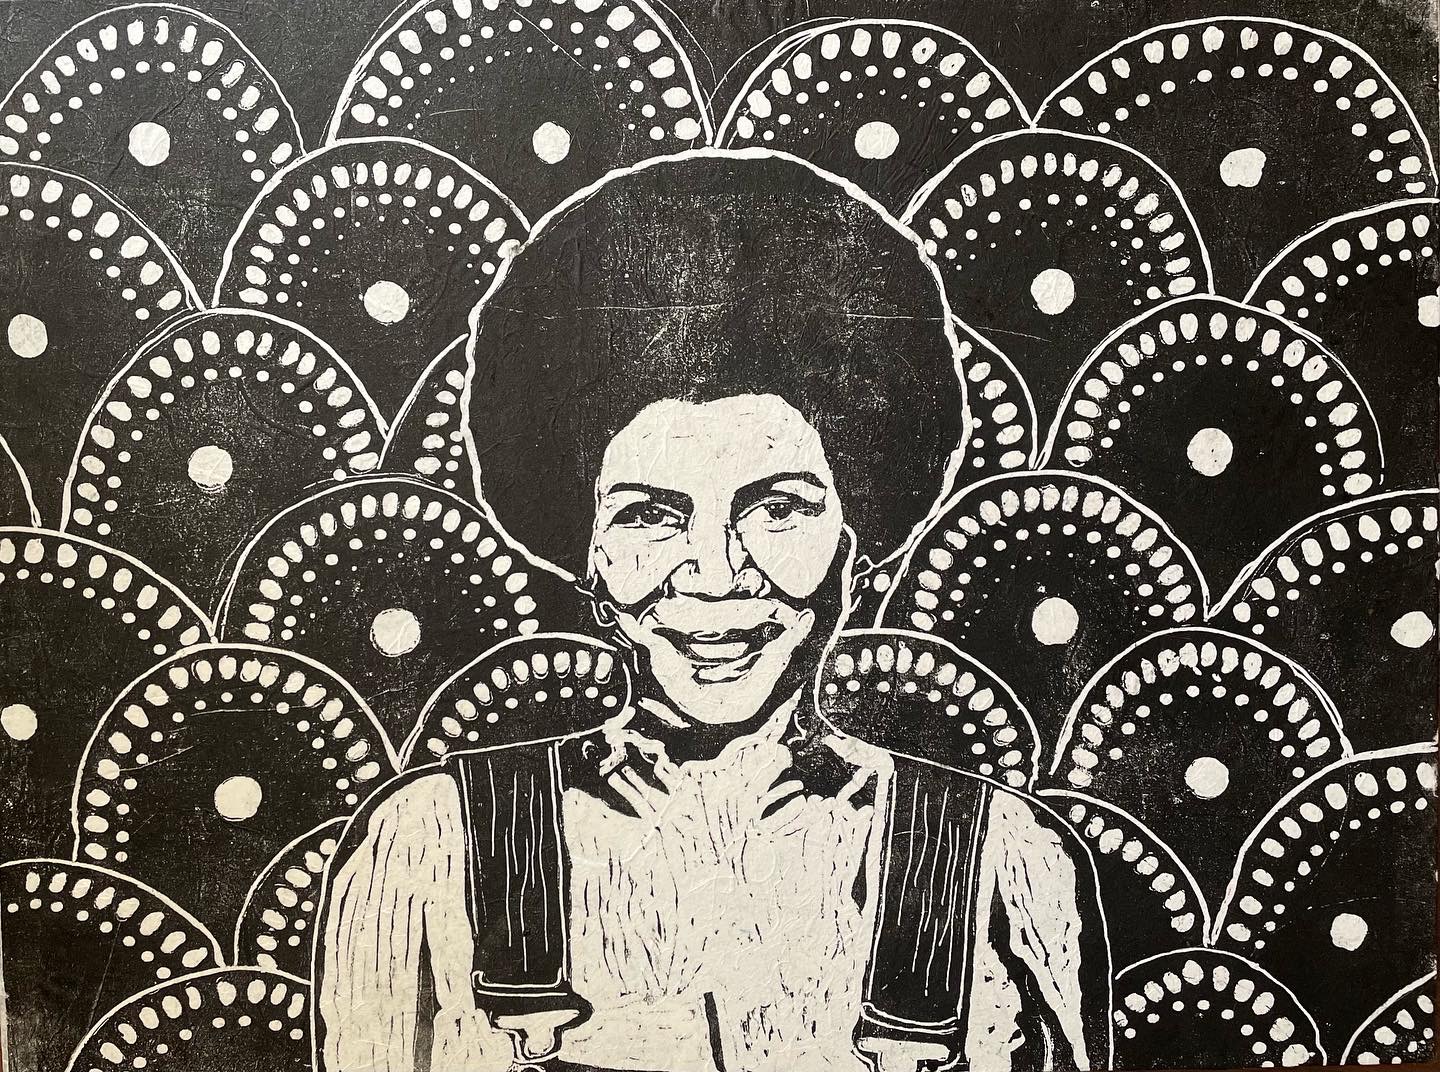 A black and white print shows Minnie Riperton wearing an afro and overalls with circular mandala shapes surrounding her in the background